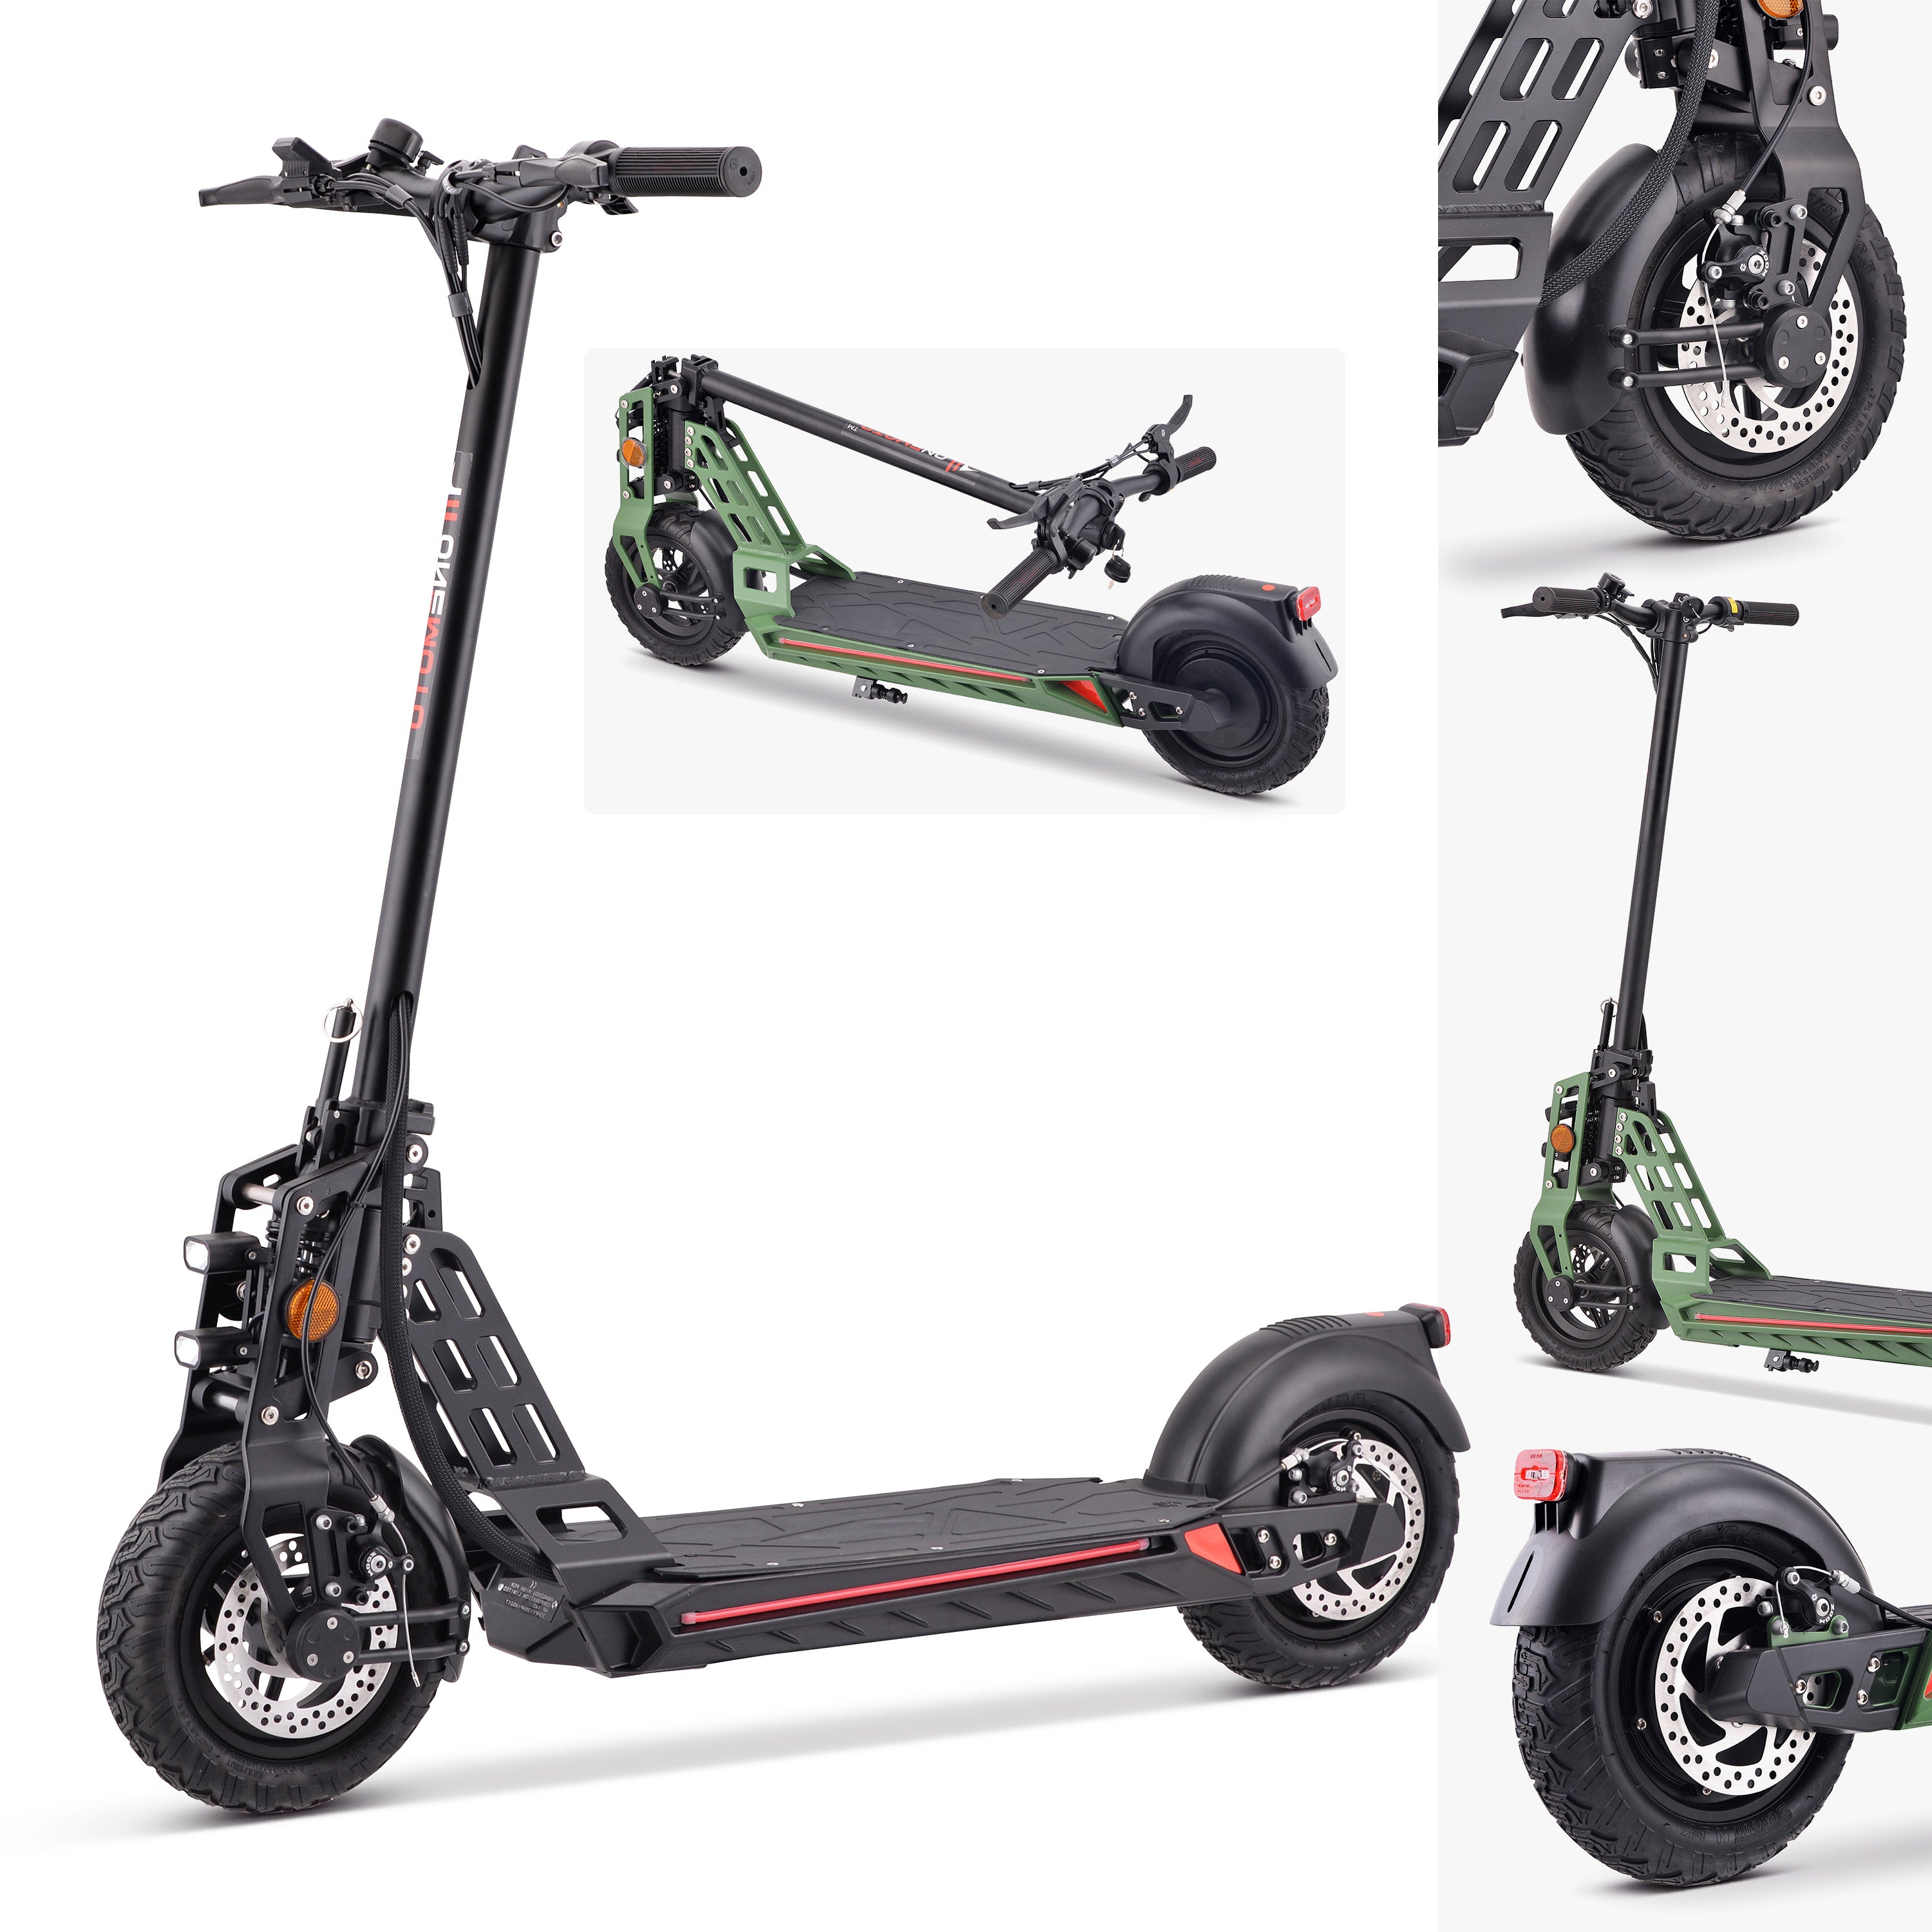 onescooter-adult-electric-e-scooter-500w-36v-battery-foldable-ex1s-Main-Black.jpg